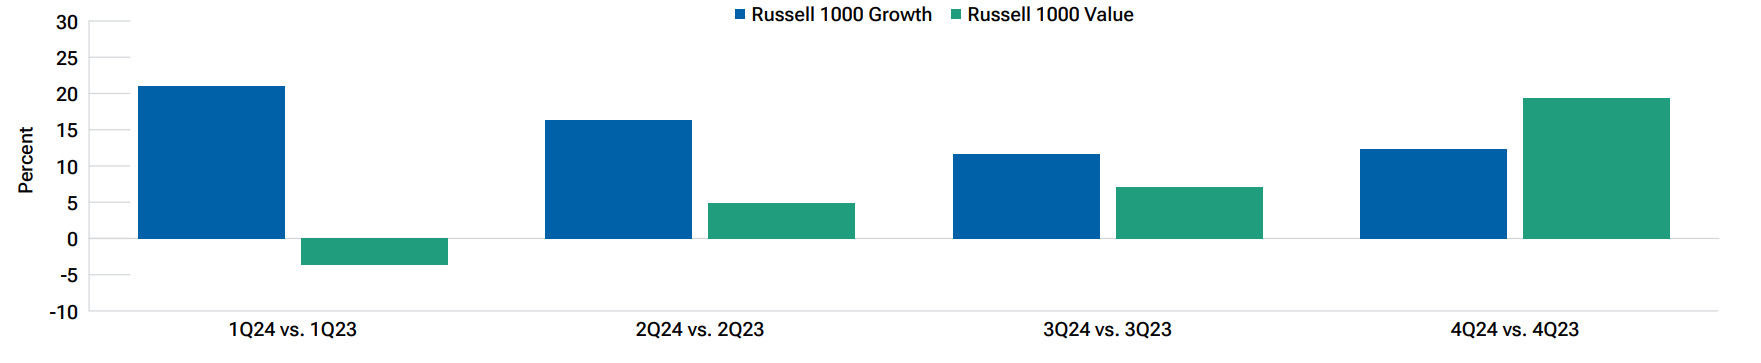 Bar chart showing that estimated earnings for Russell 1000 Value firms are expected to outstrip those of Russell 1000 Growth firms in the final quarter of the year.